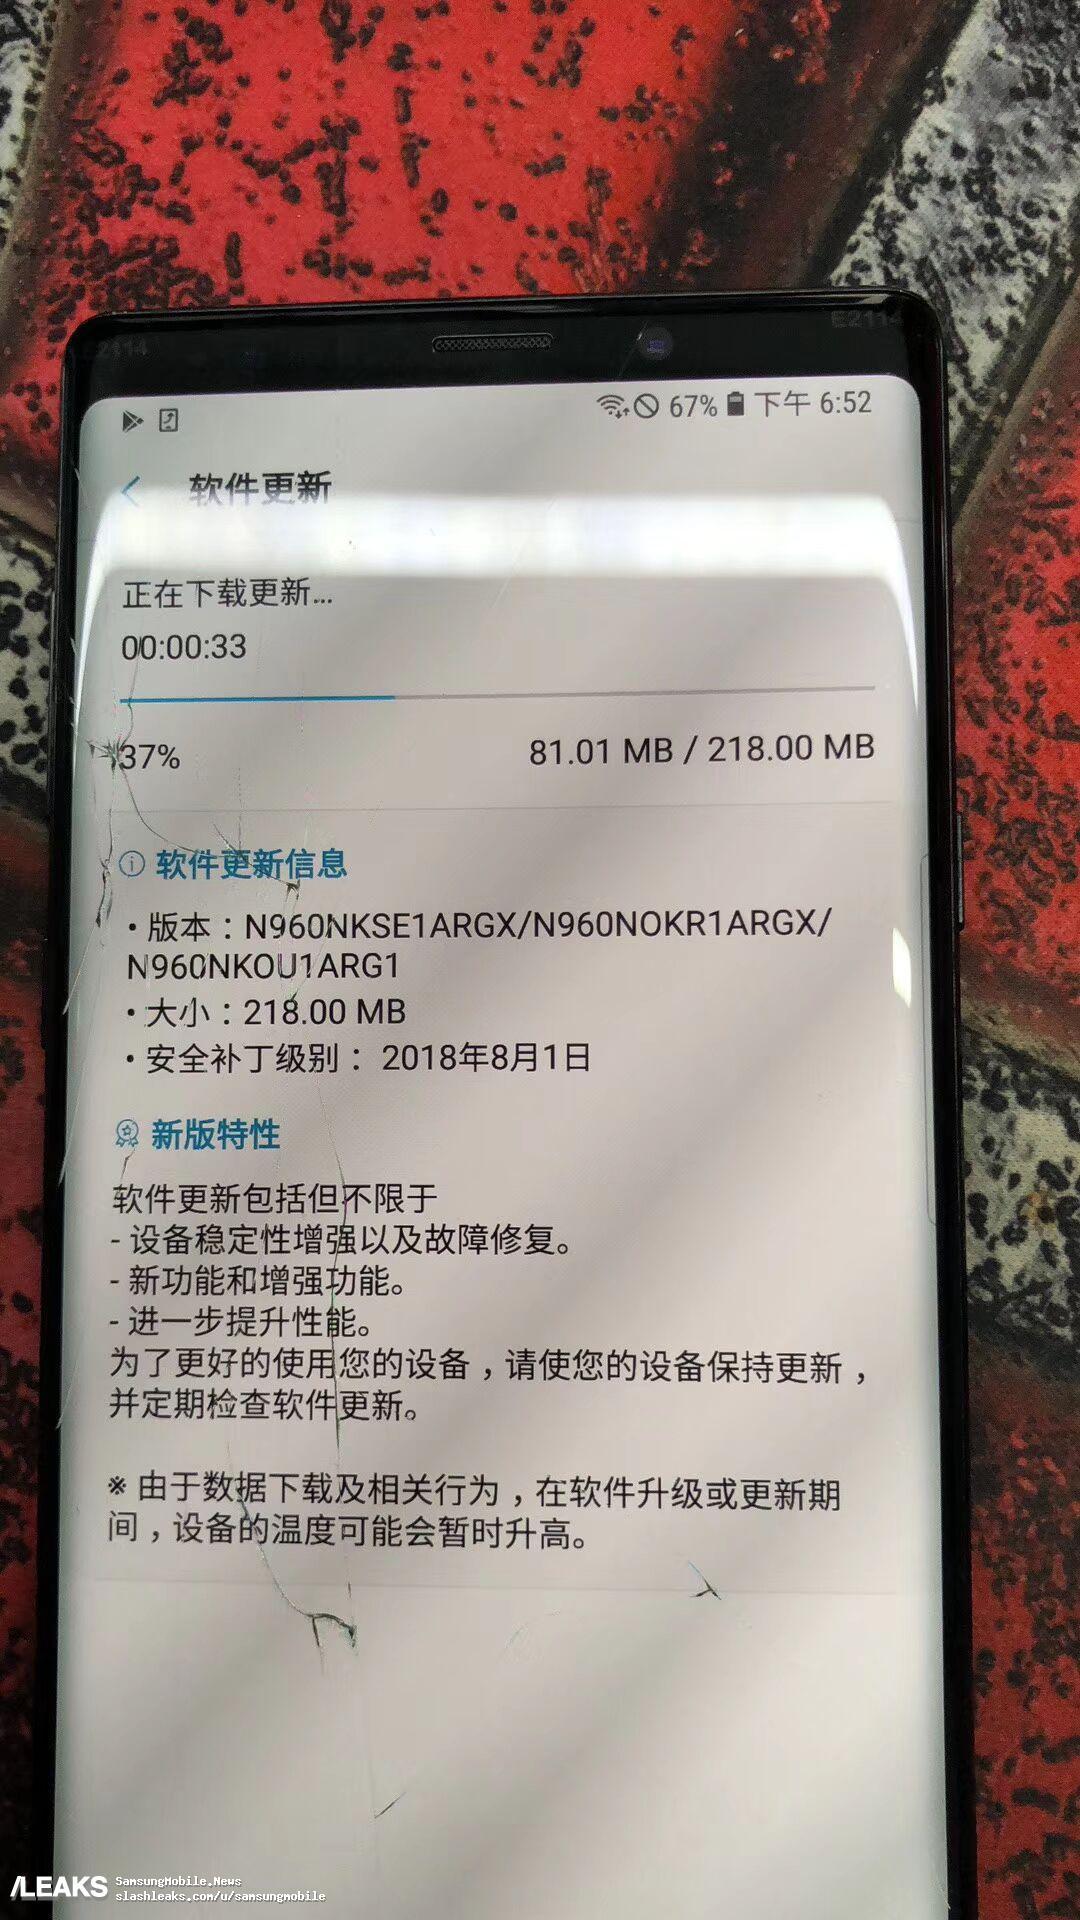 Alleged photo of a Samsung Galaxy Note 9 unit with a broken screen. The photo shows an update available for the device - The Galaxy Note 9 appears in new leaked photos